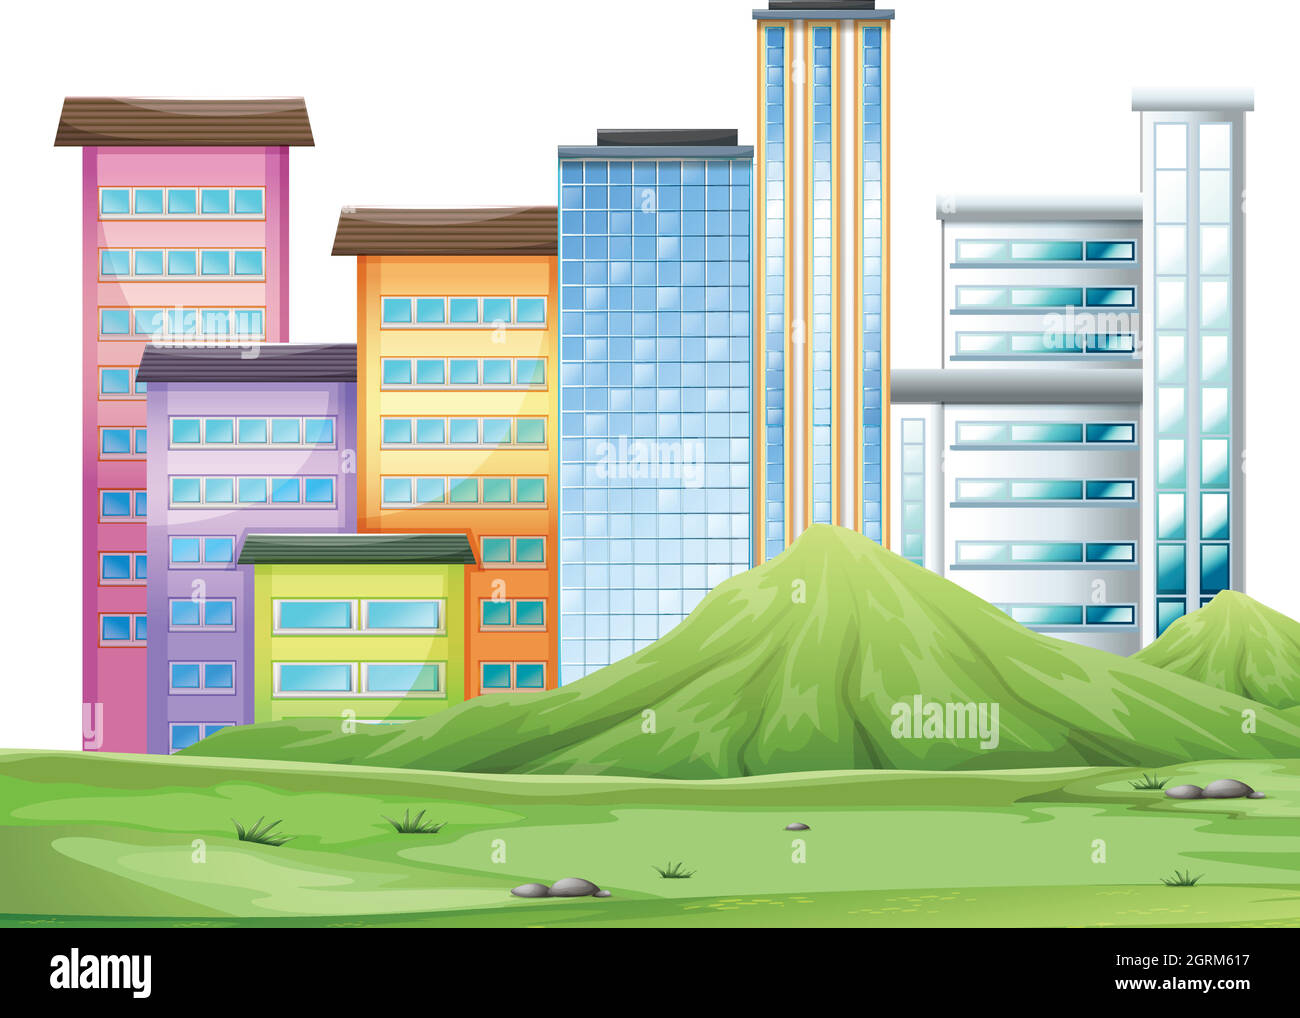 Buildings in the town Stock Vector